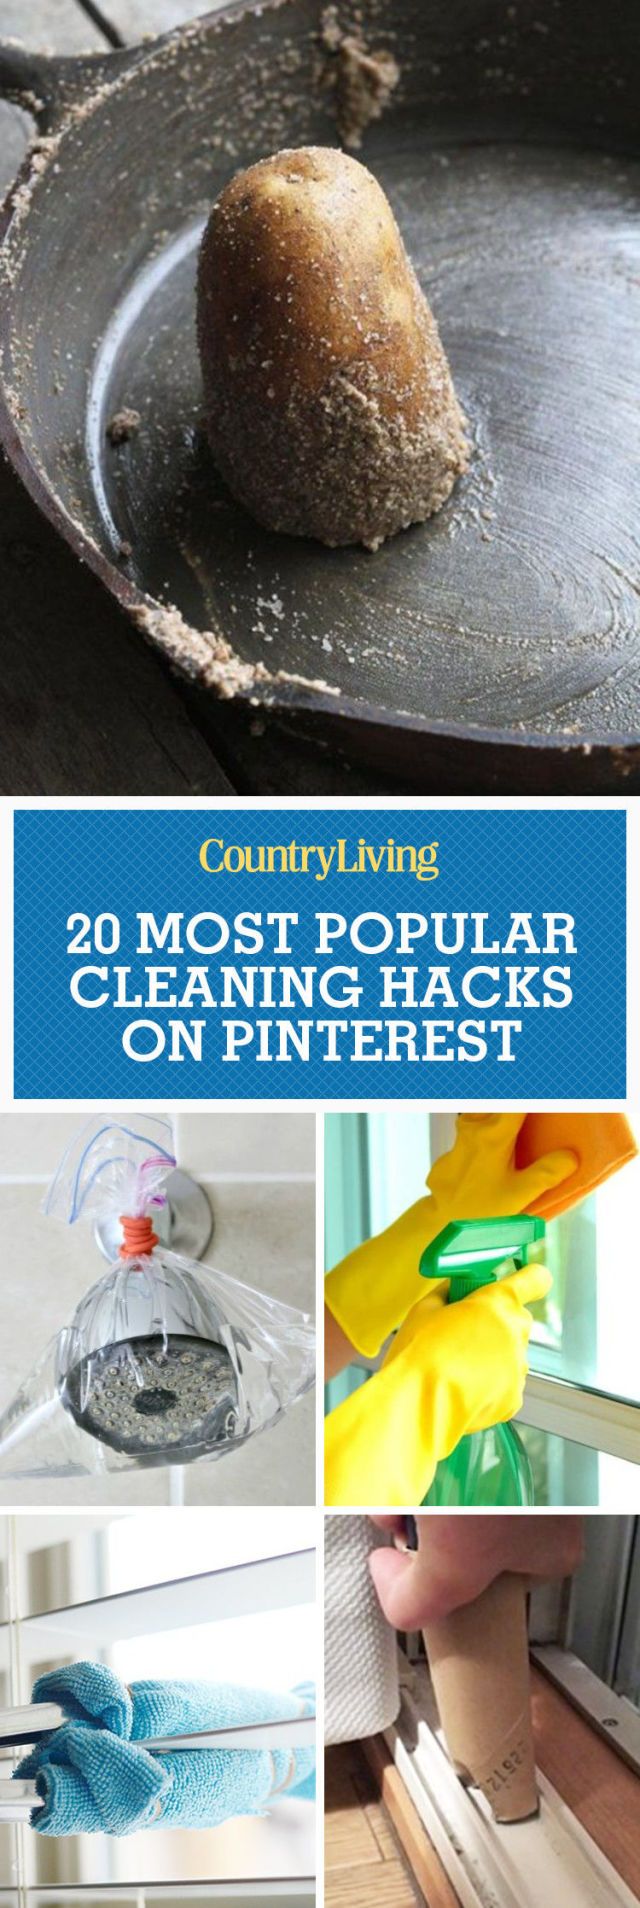 Pinterest  Cleaning hacks, House cleaning tips, Window cleaner